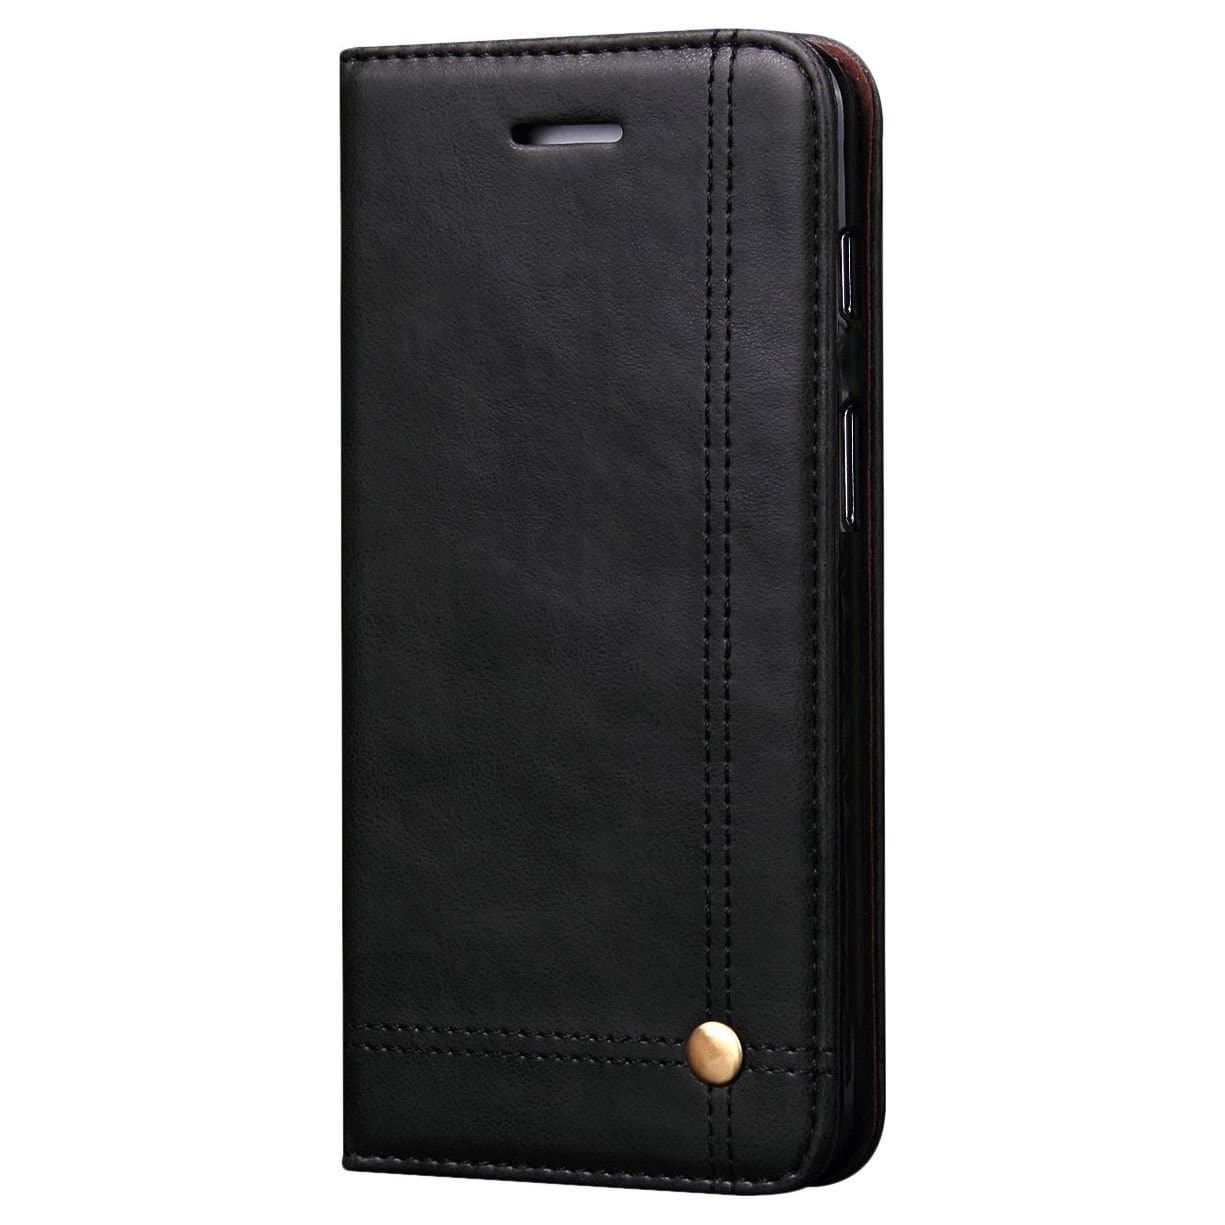 Magnetic Flip Cover for Samsung Galaxy Note 9 Leather Case Wallet Slim Book Cover with Card Slots Cash Pocket Stand Holder - Brown